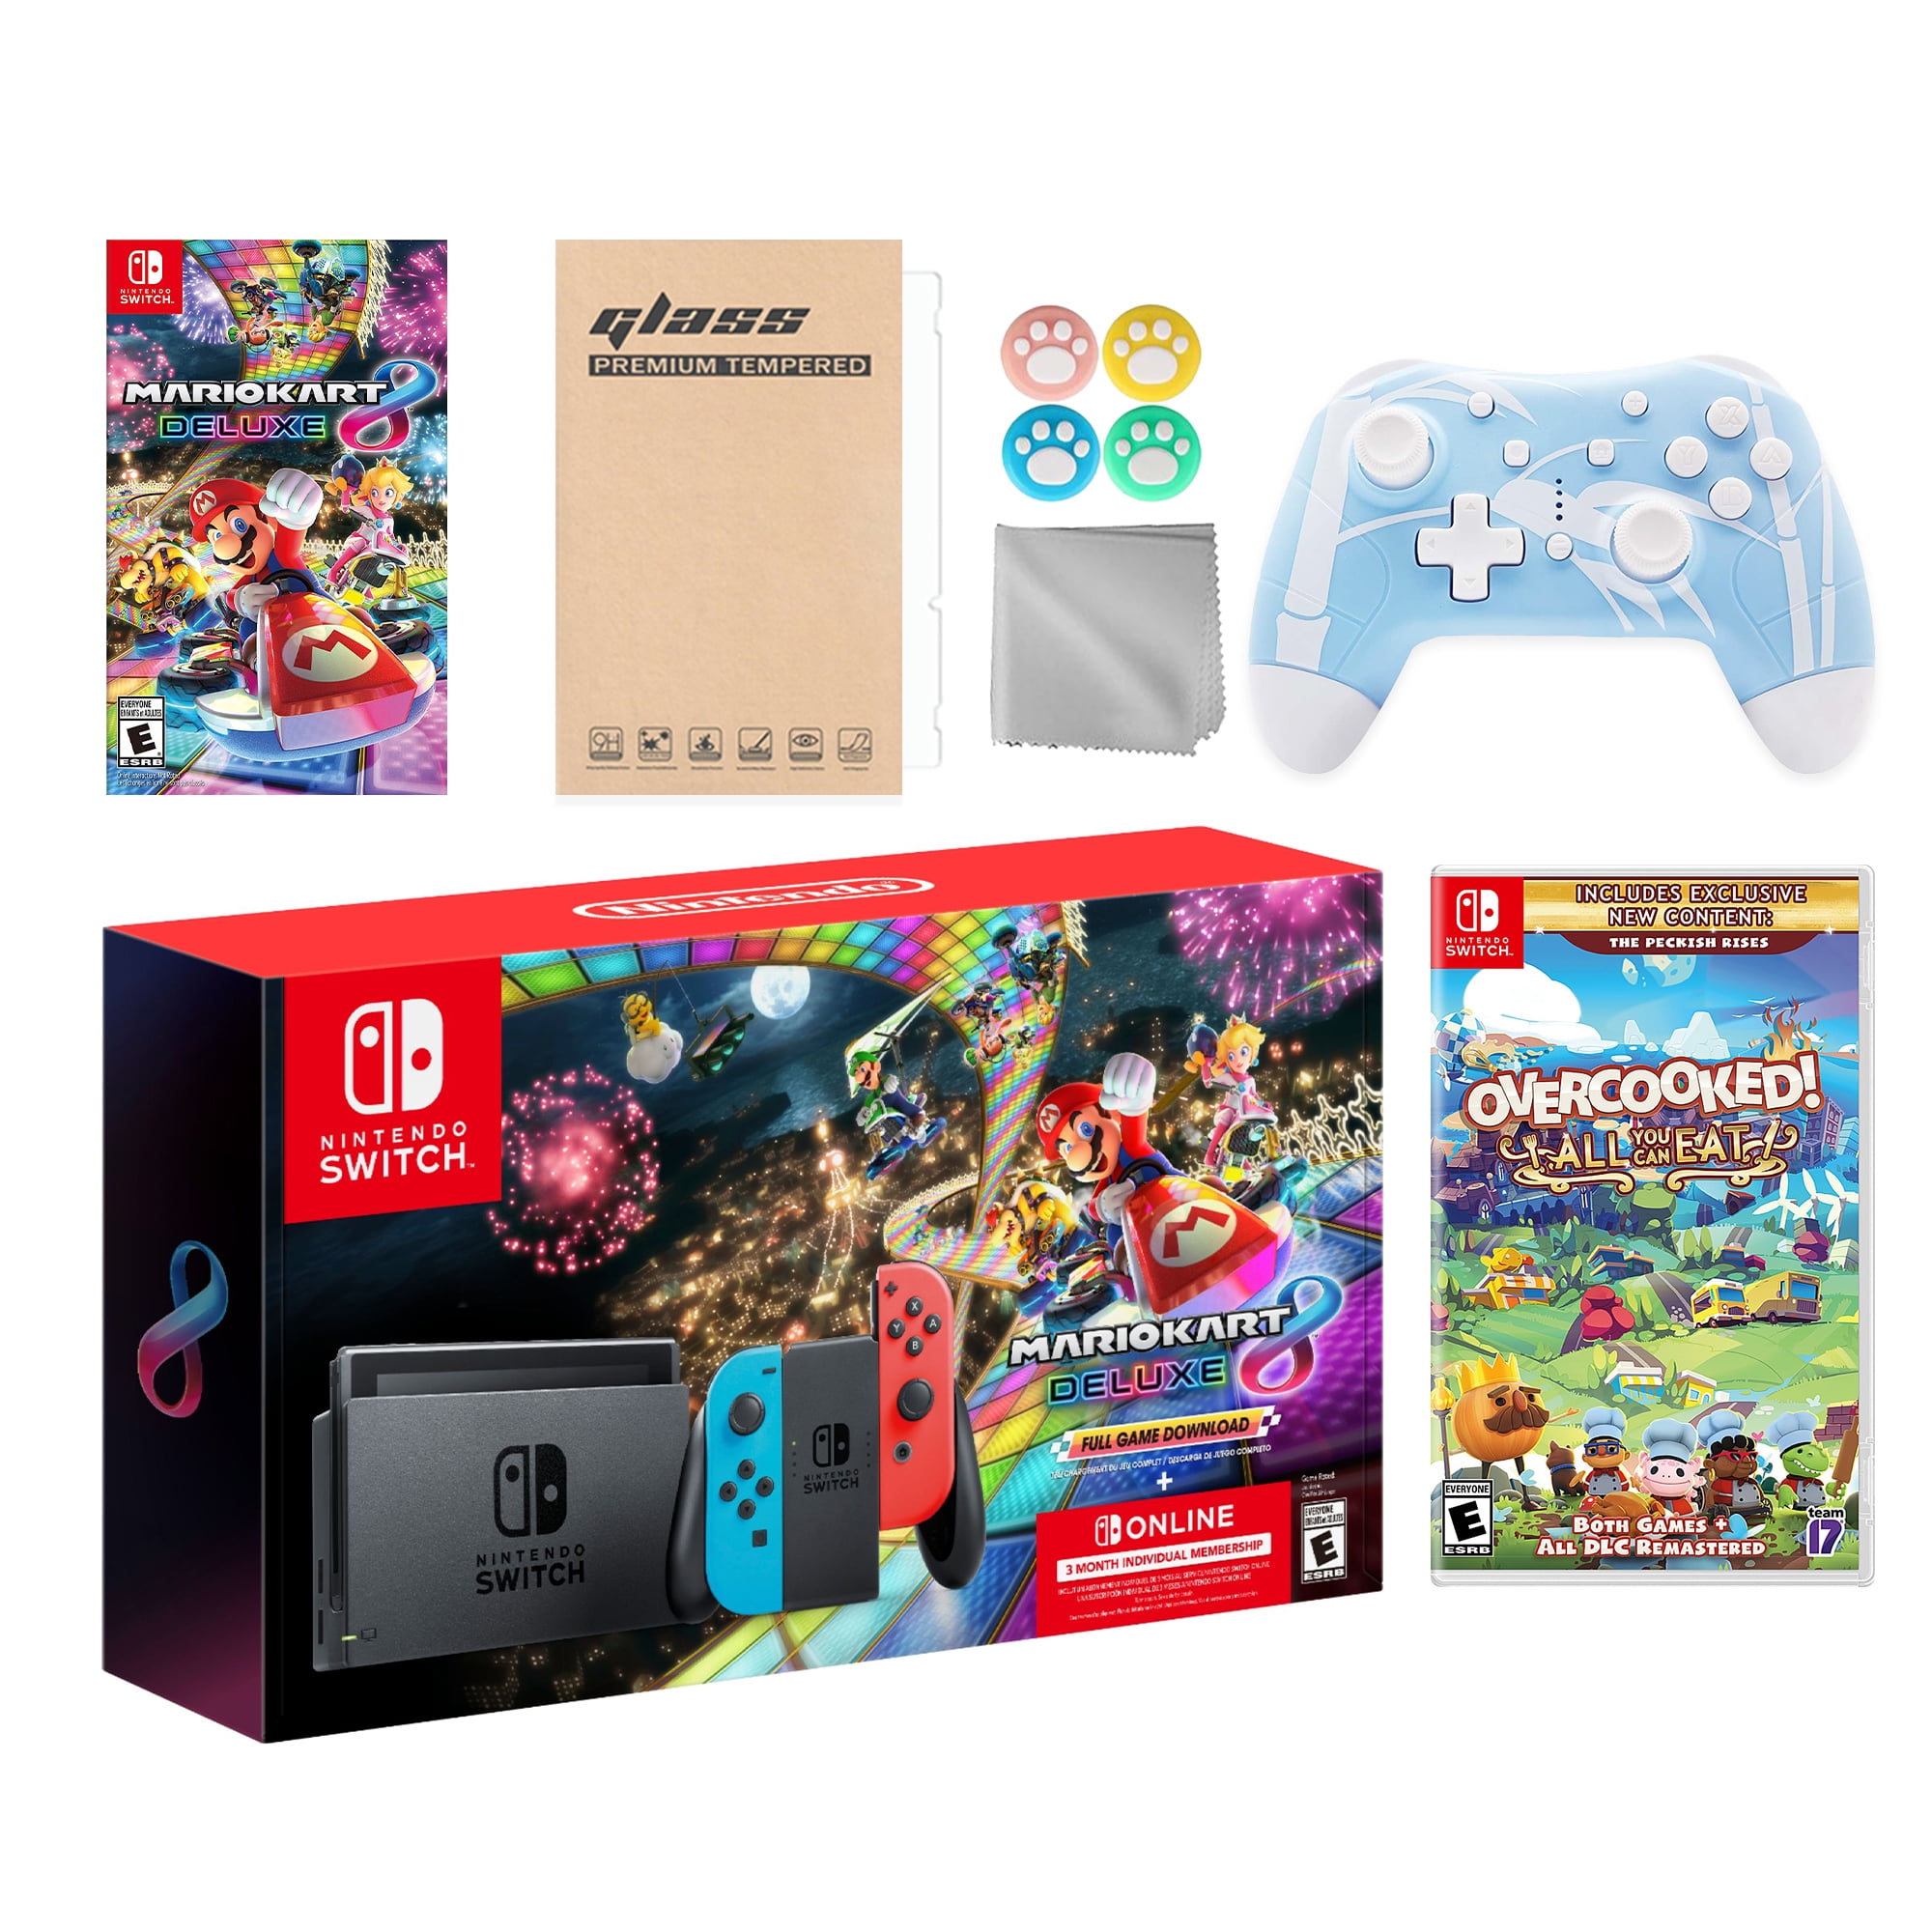 Classic Logical Bundle (4in1) for Nintendo Switch - Nintendo